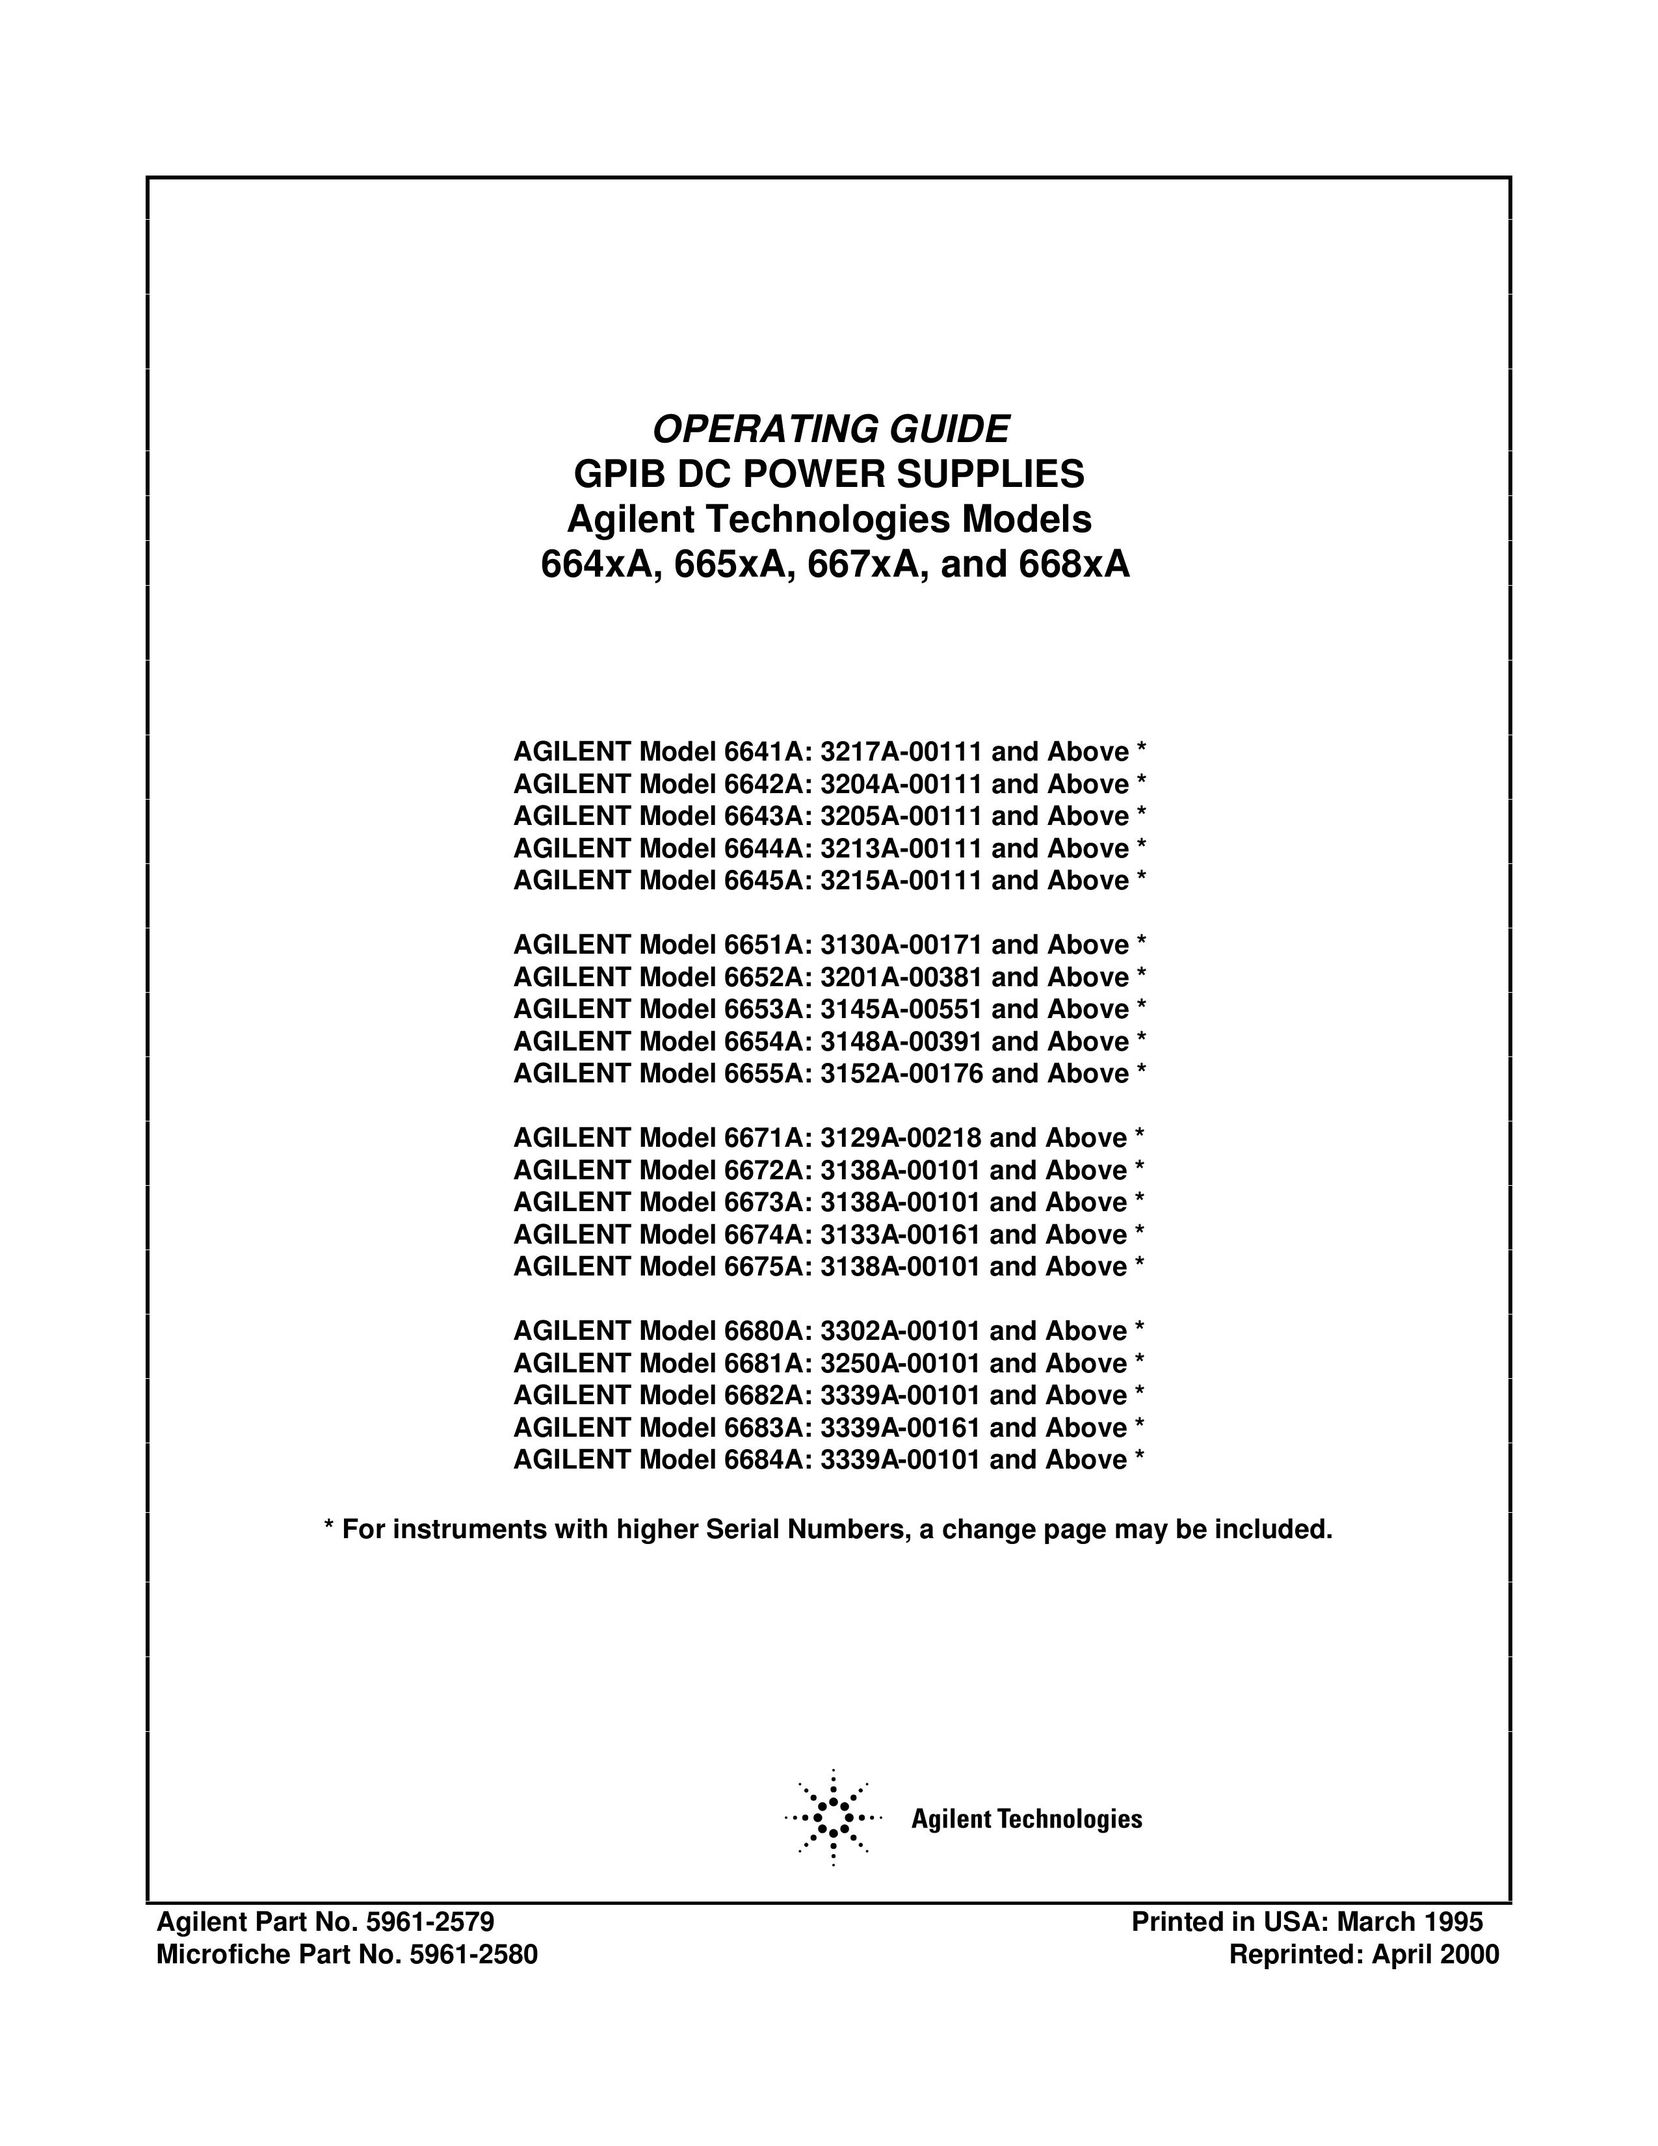 Agilent Technologies AGILENT Model 6653A: 3145A-00551 Video Gaming Accessories User Manual (Page 1)